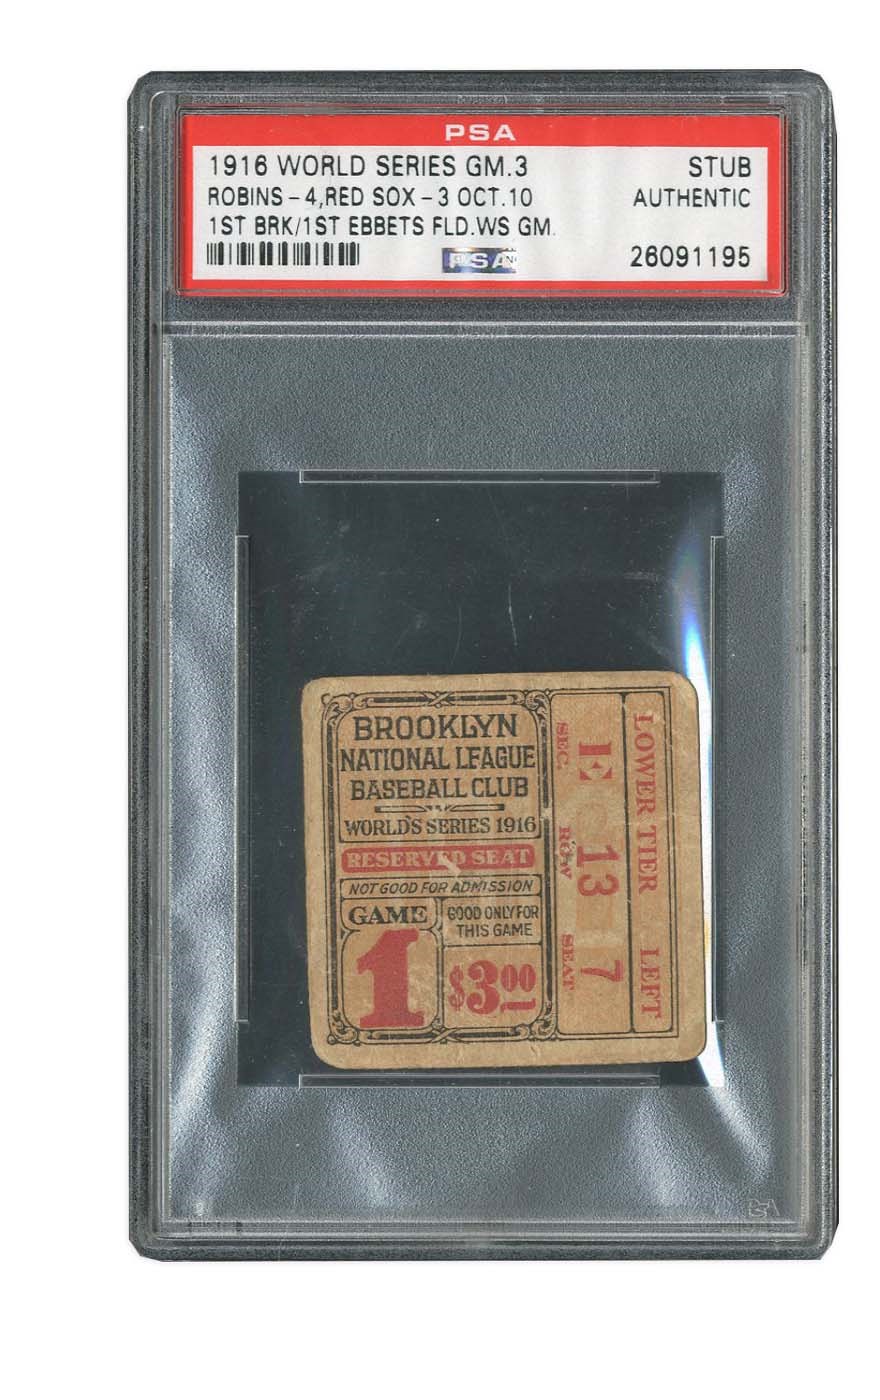 - 1916 World Series Ticket at Brooklyn (PSA Authentic)